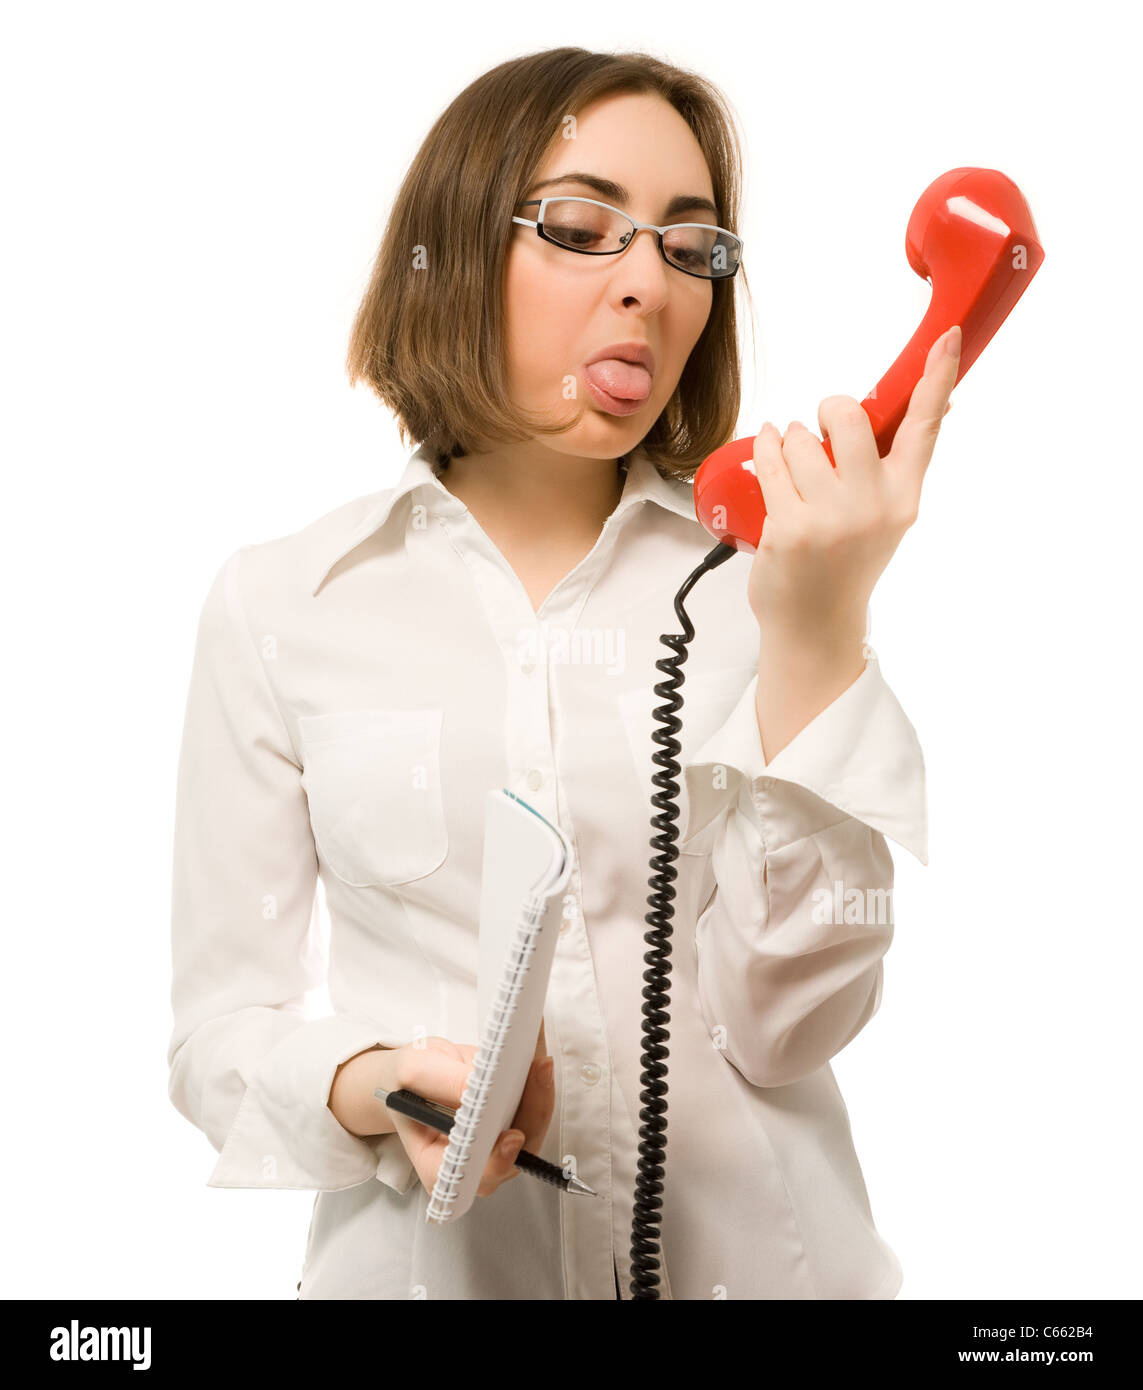 Picture of secretary showing tongue to the handset Stock Photo